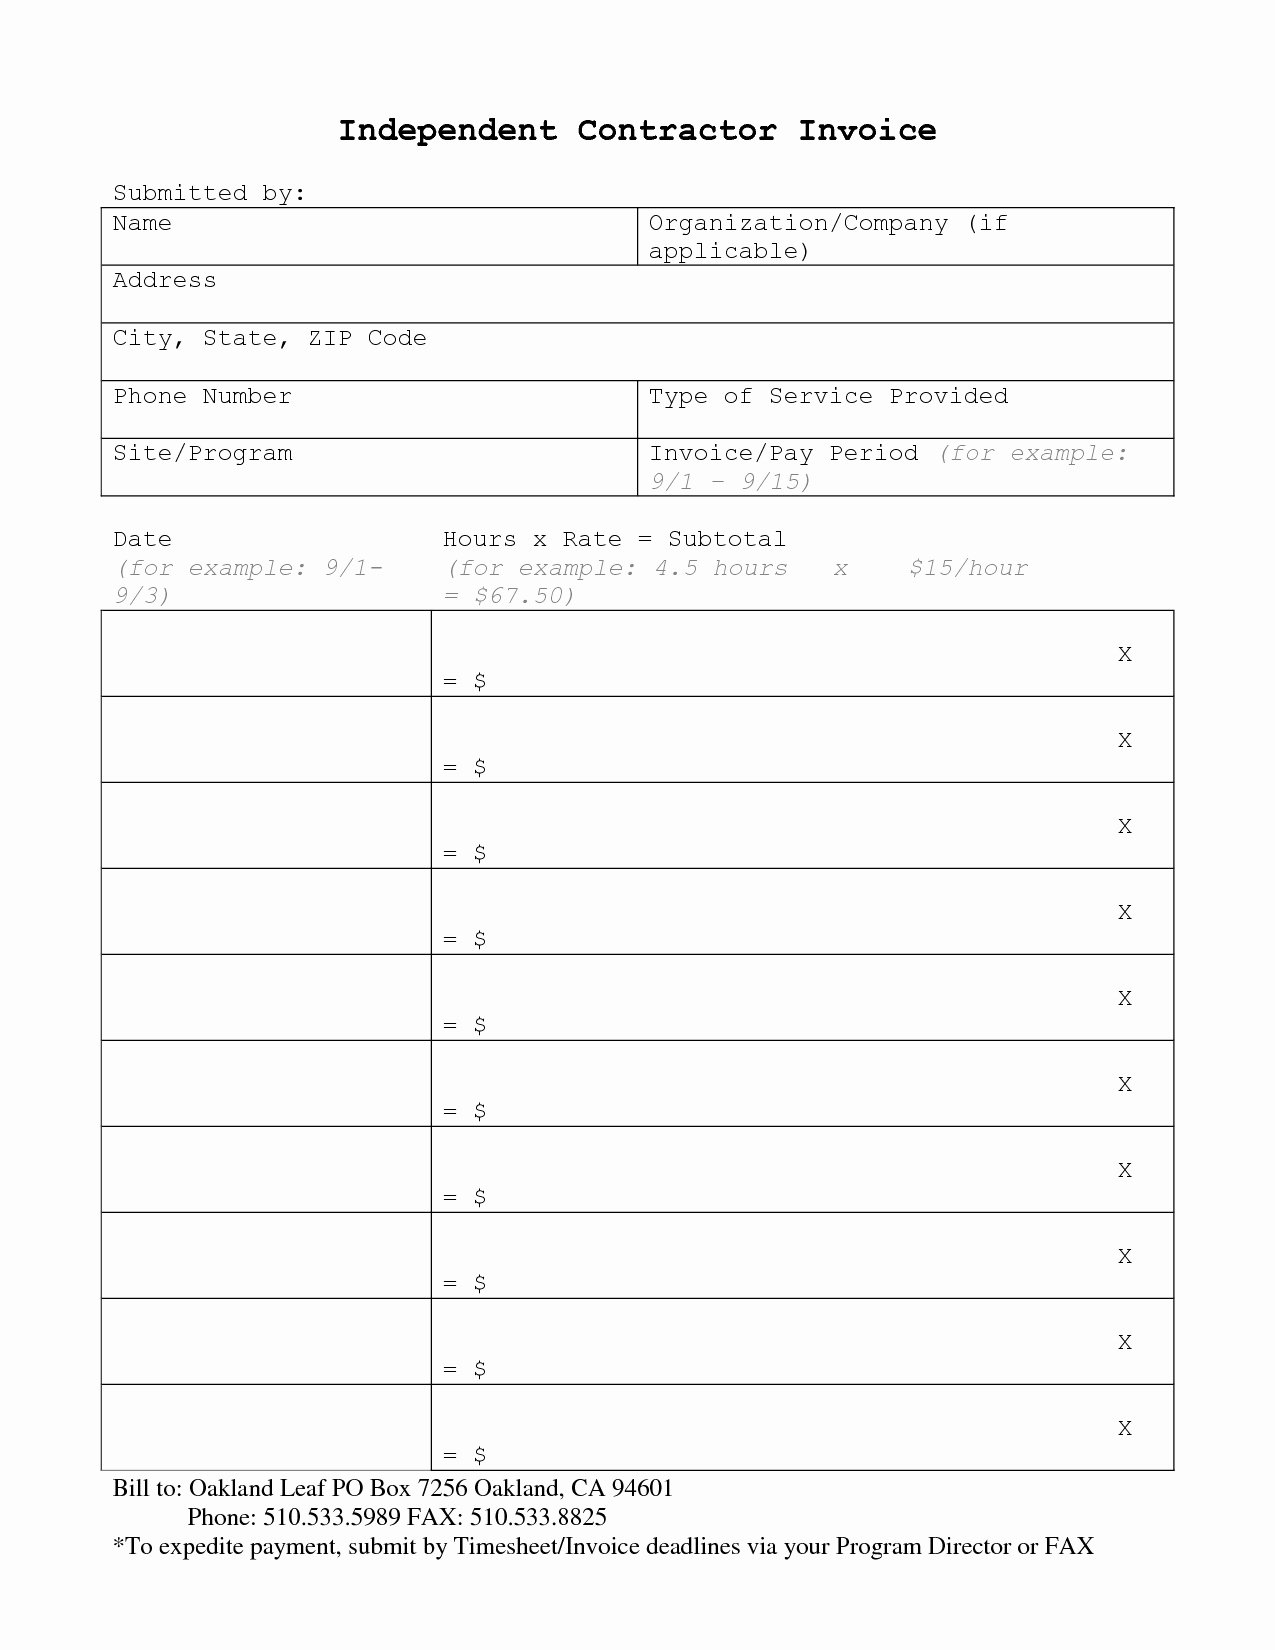 Independent Contractor Invoice Template Free Lovely Independent Contractor Invoice Invoice Template Ideas